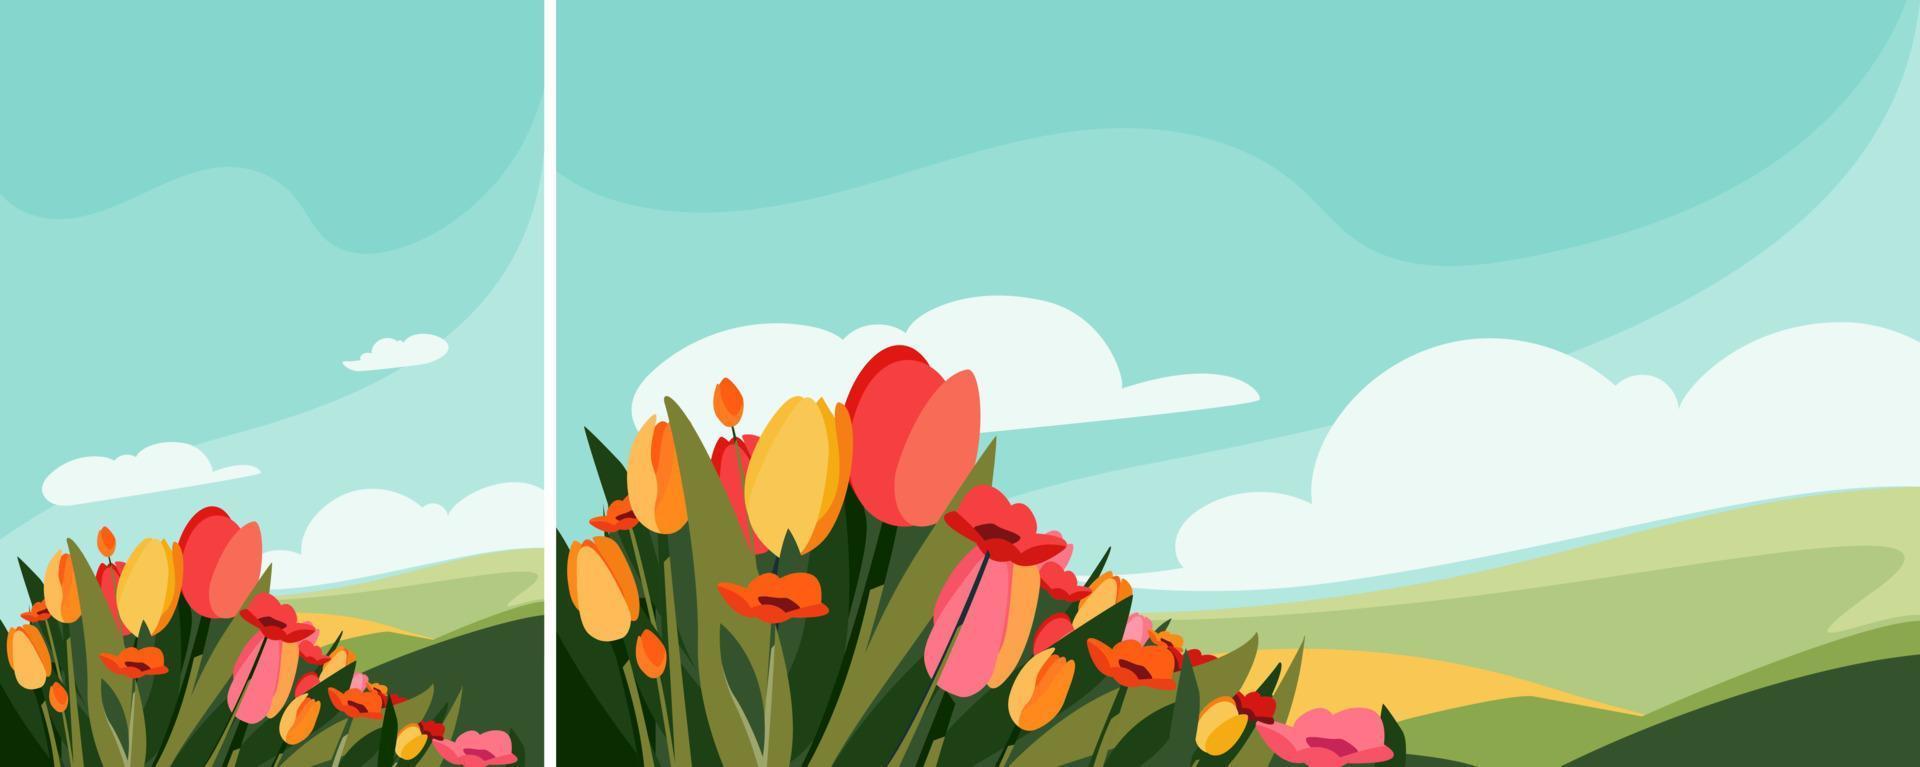 Different flowers on the meadow. Nature landscape in different formats. vector